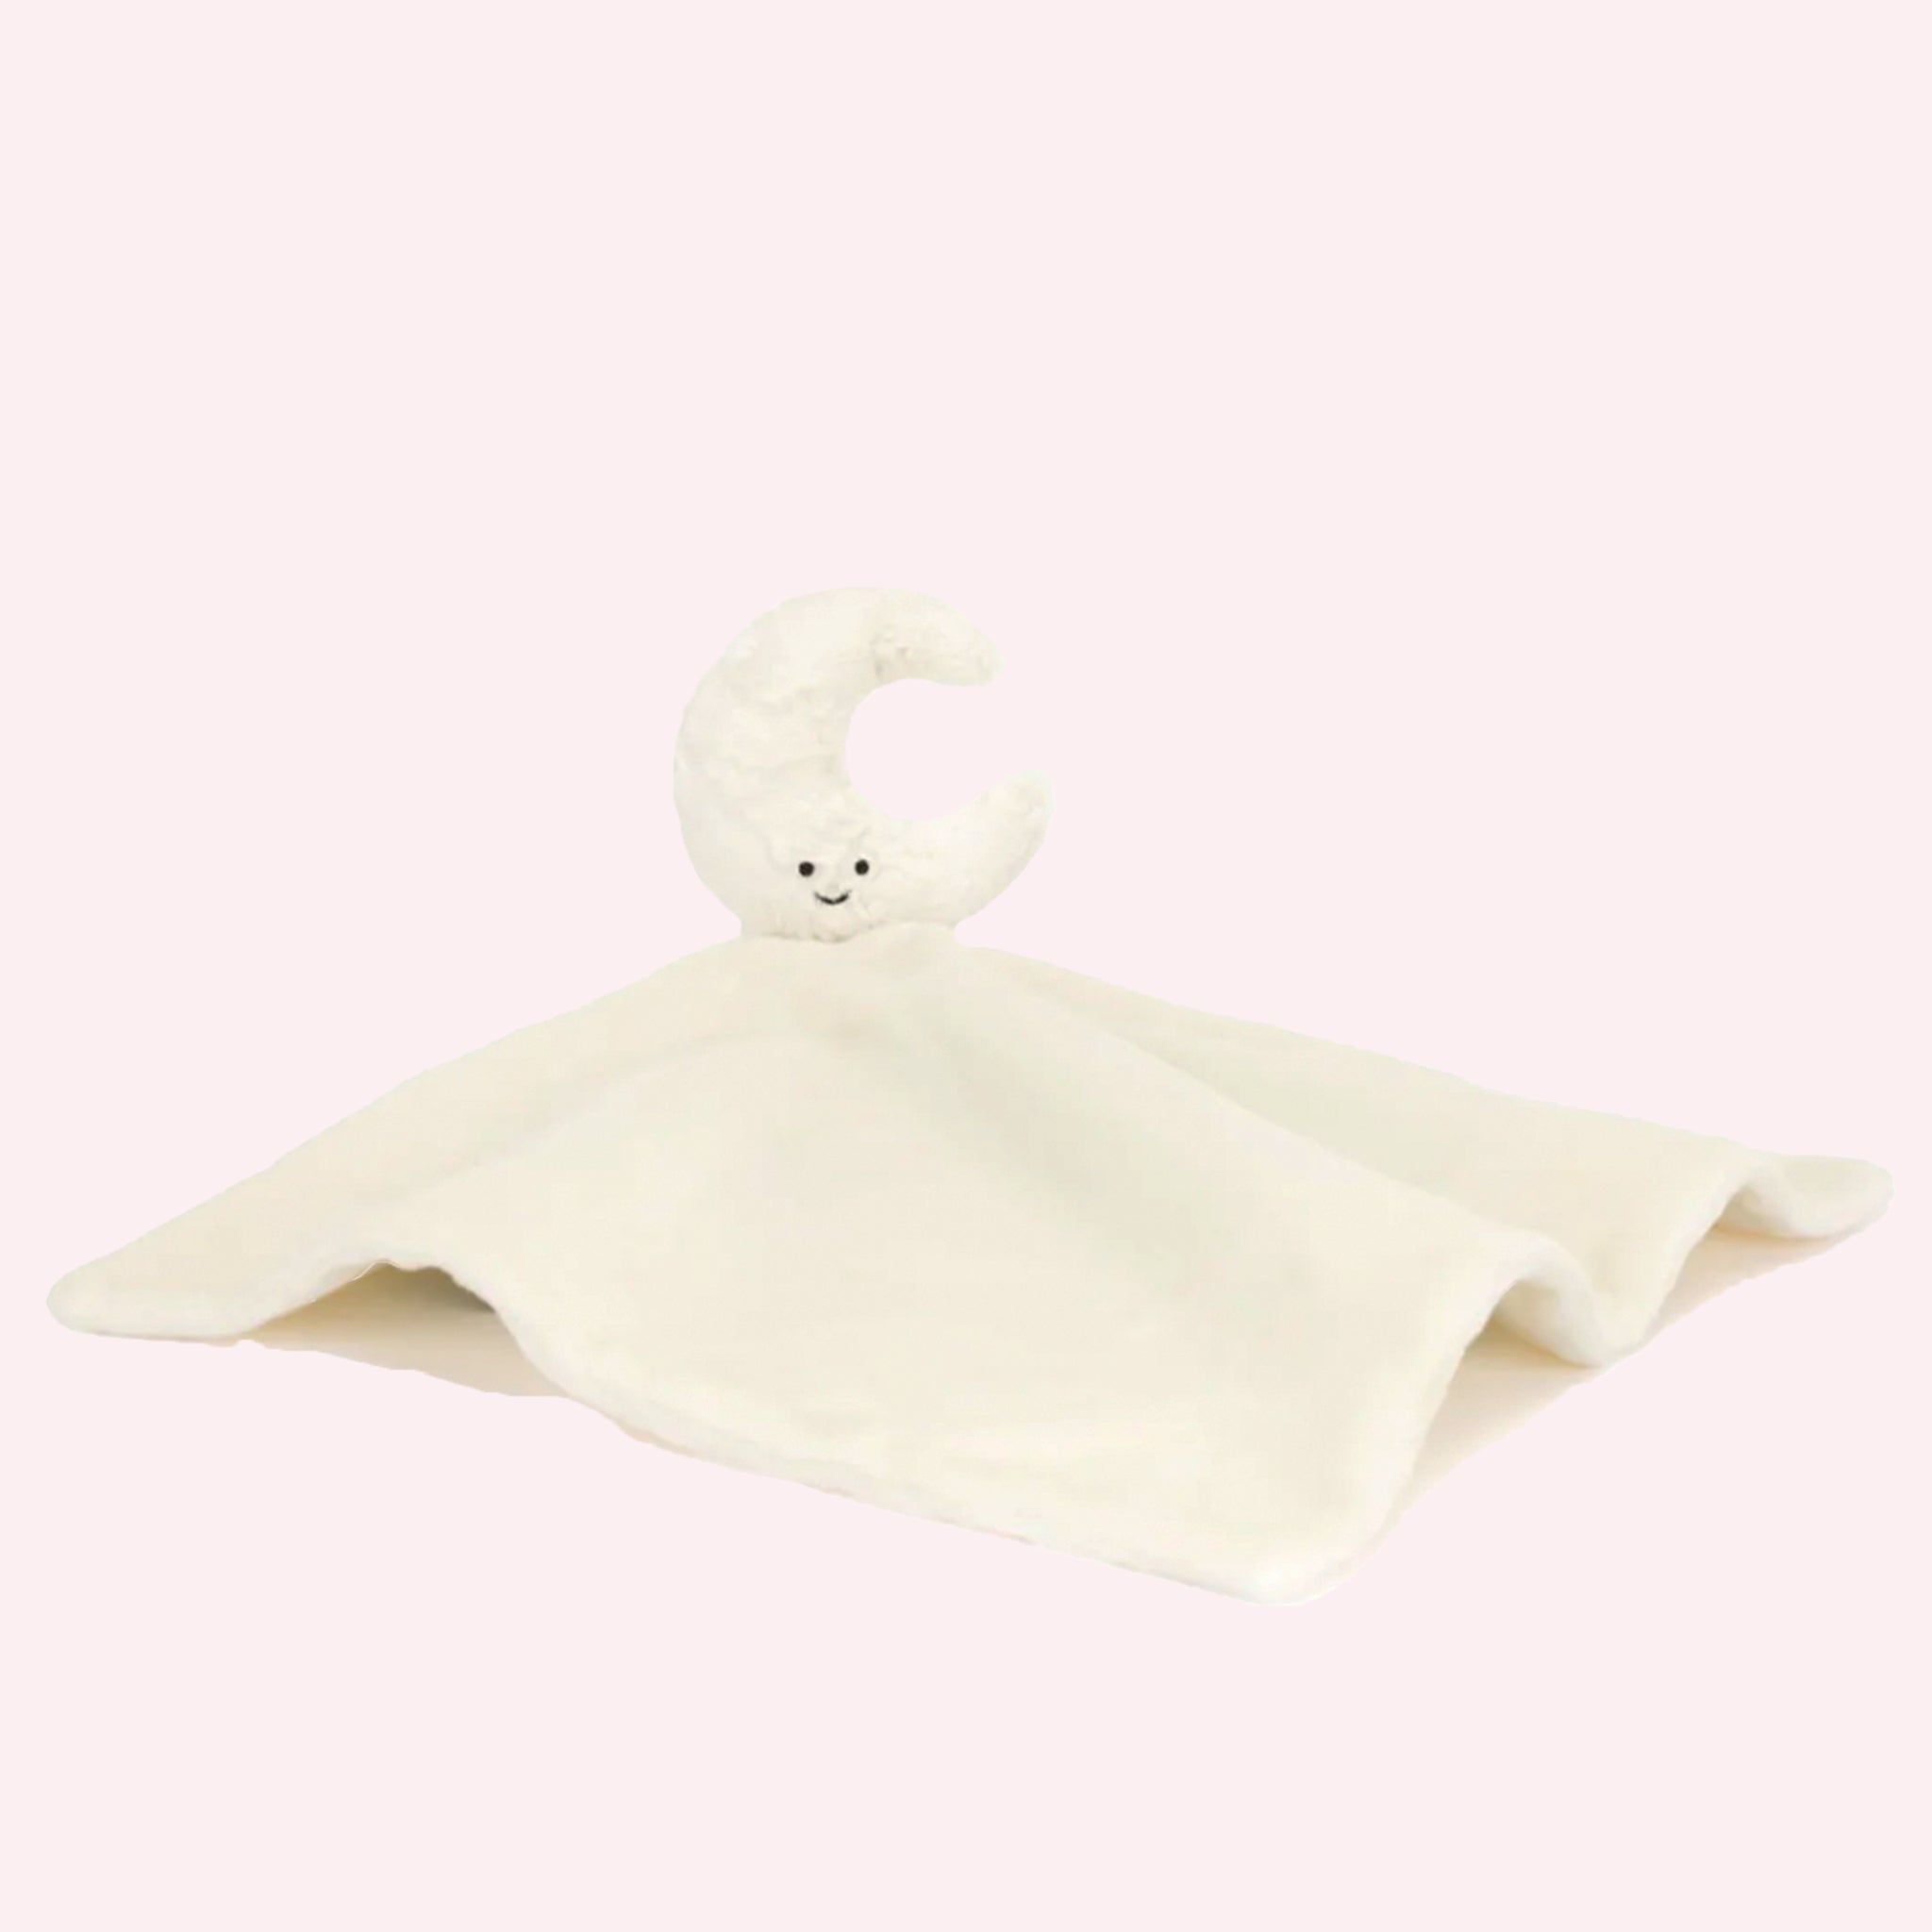 On a pink background is an ivory colored crescent moon shaped stuffed toy attached to a fuzzy soother blanket.  